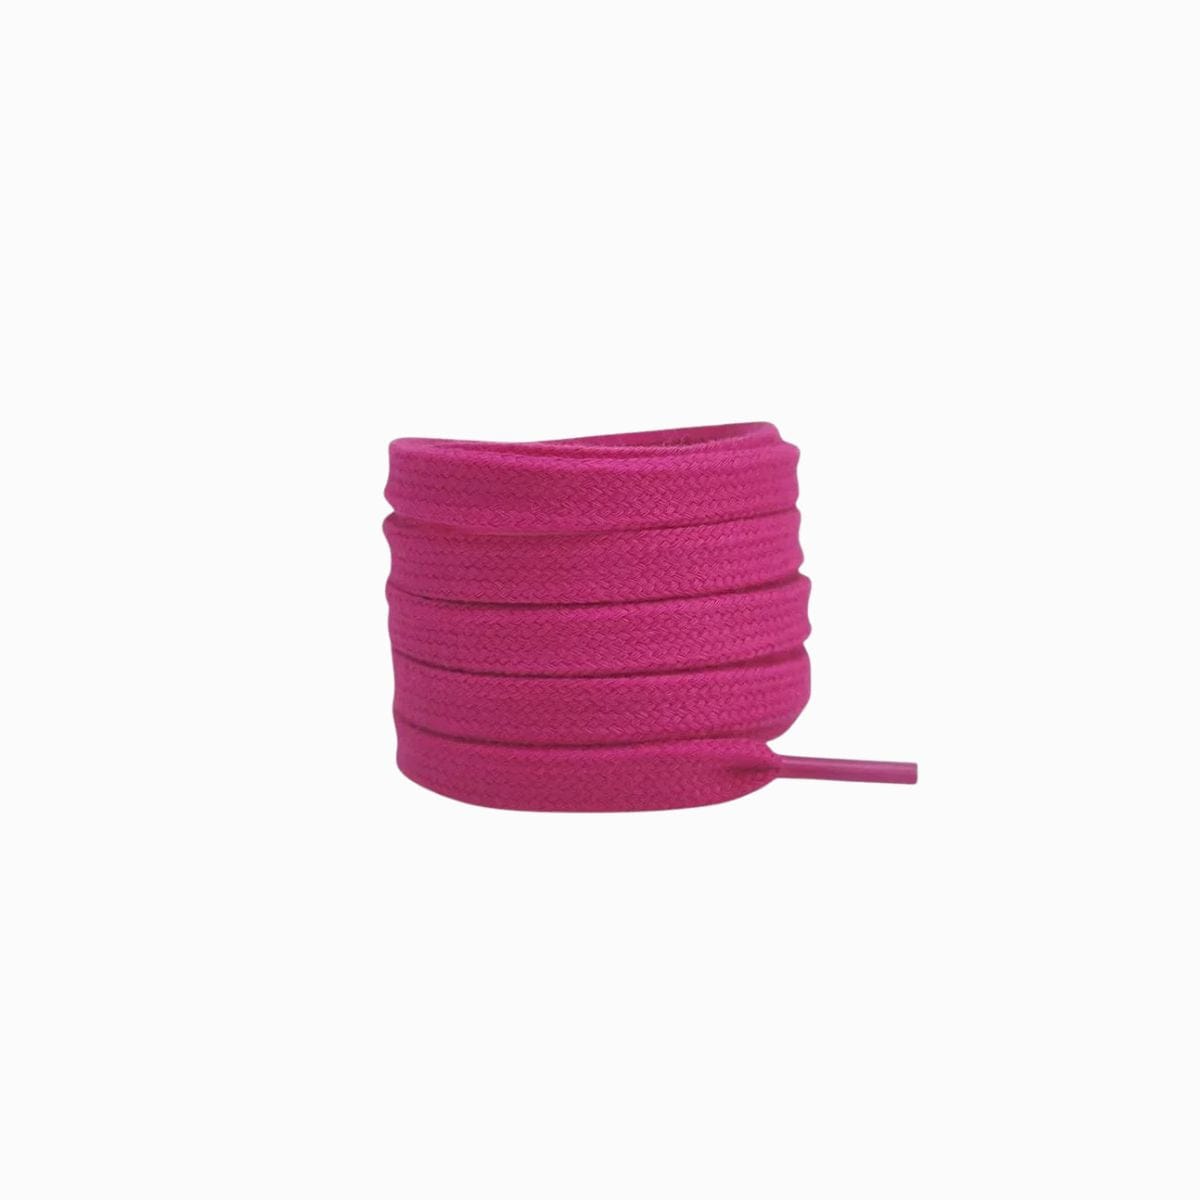 Rose Pink Replacement Adidas Shoe Laces for Adidas Samba Black Sneakers by Kicks Shoelaces